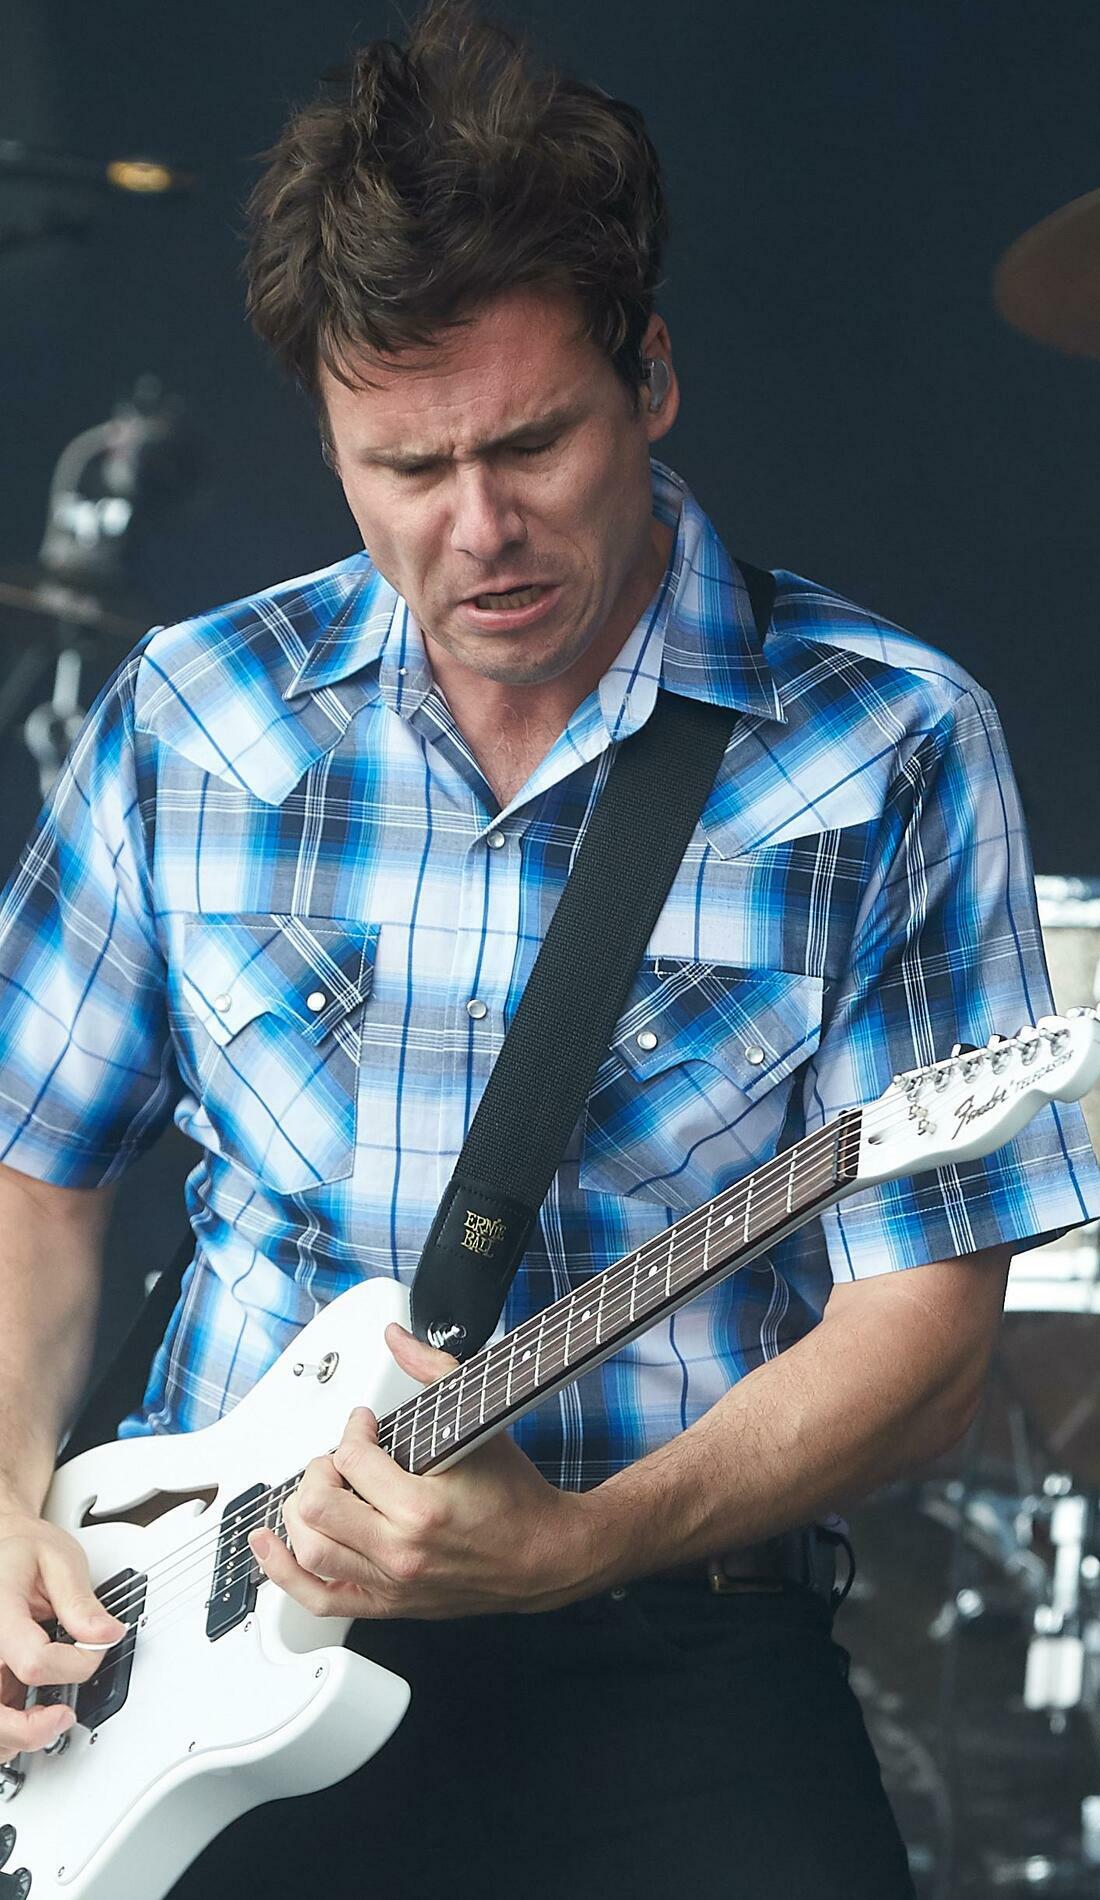 A Jimmy Eat World live event